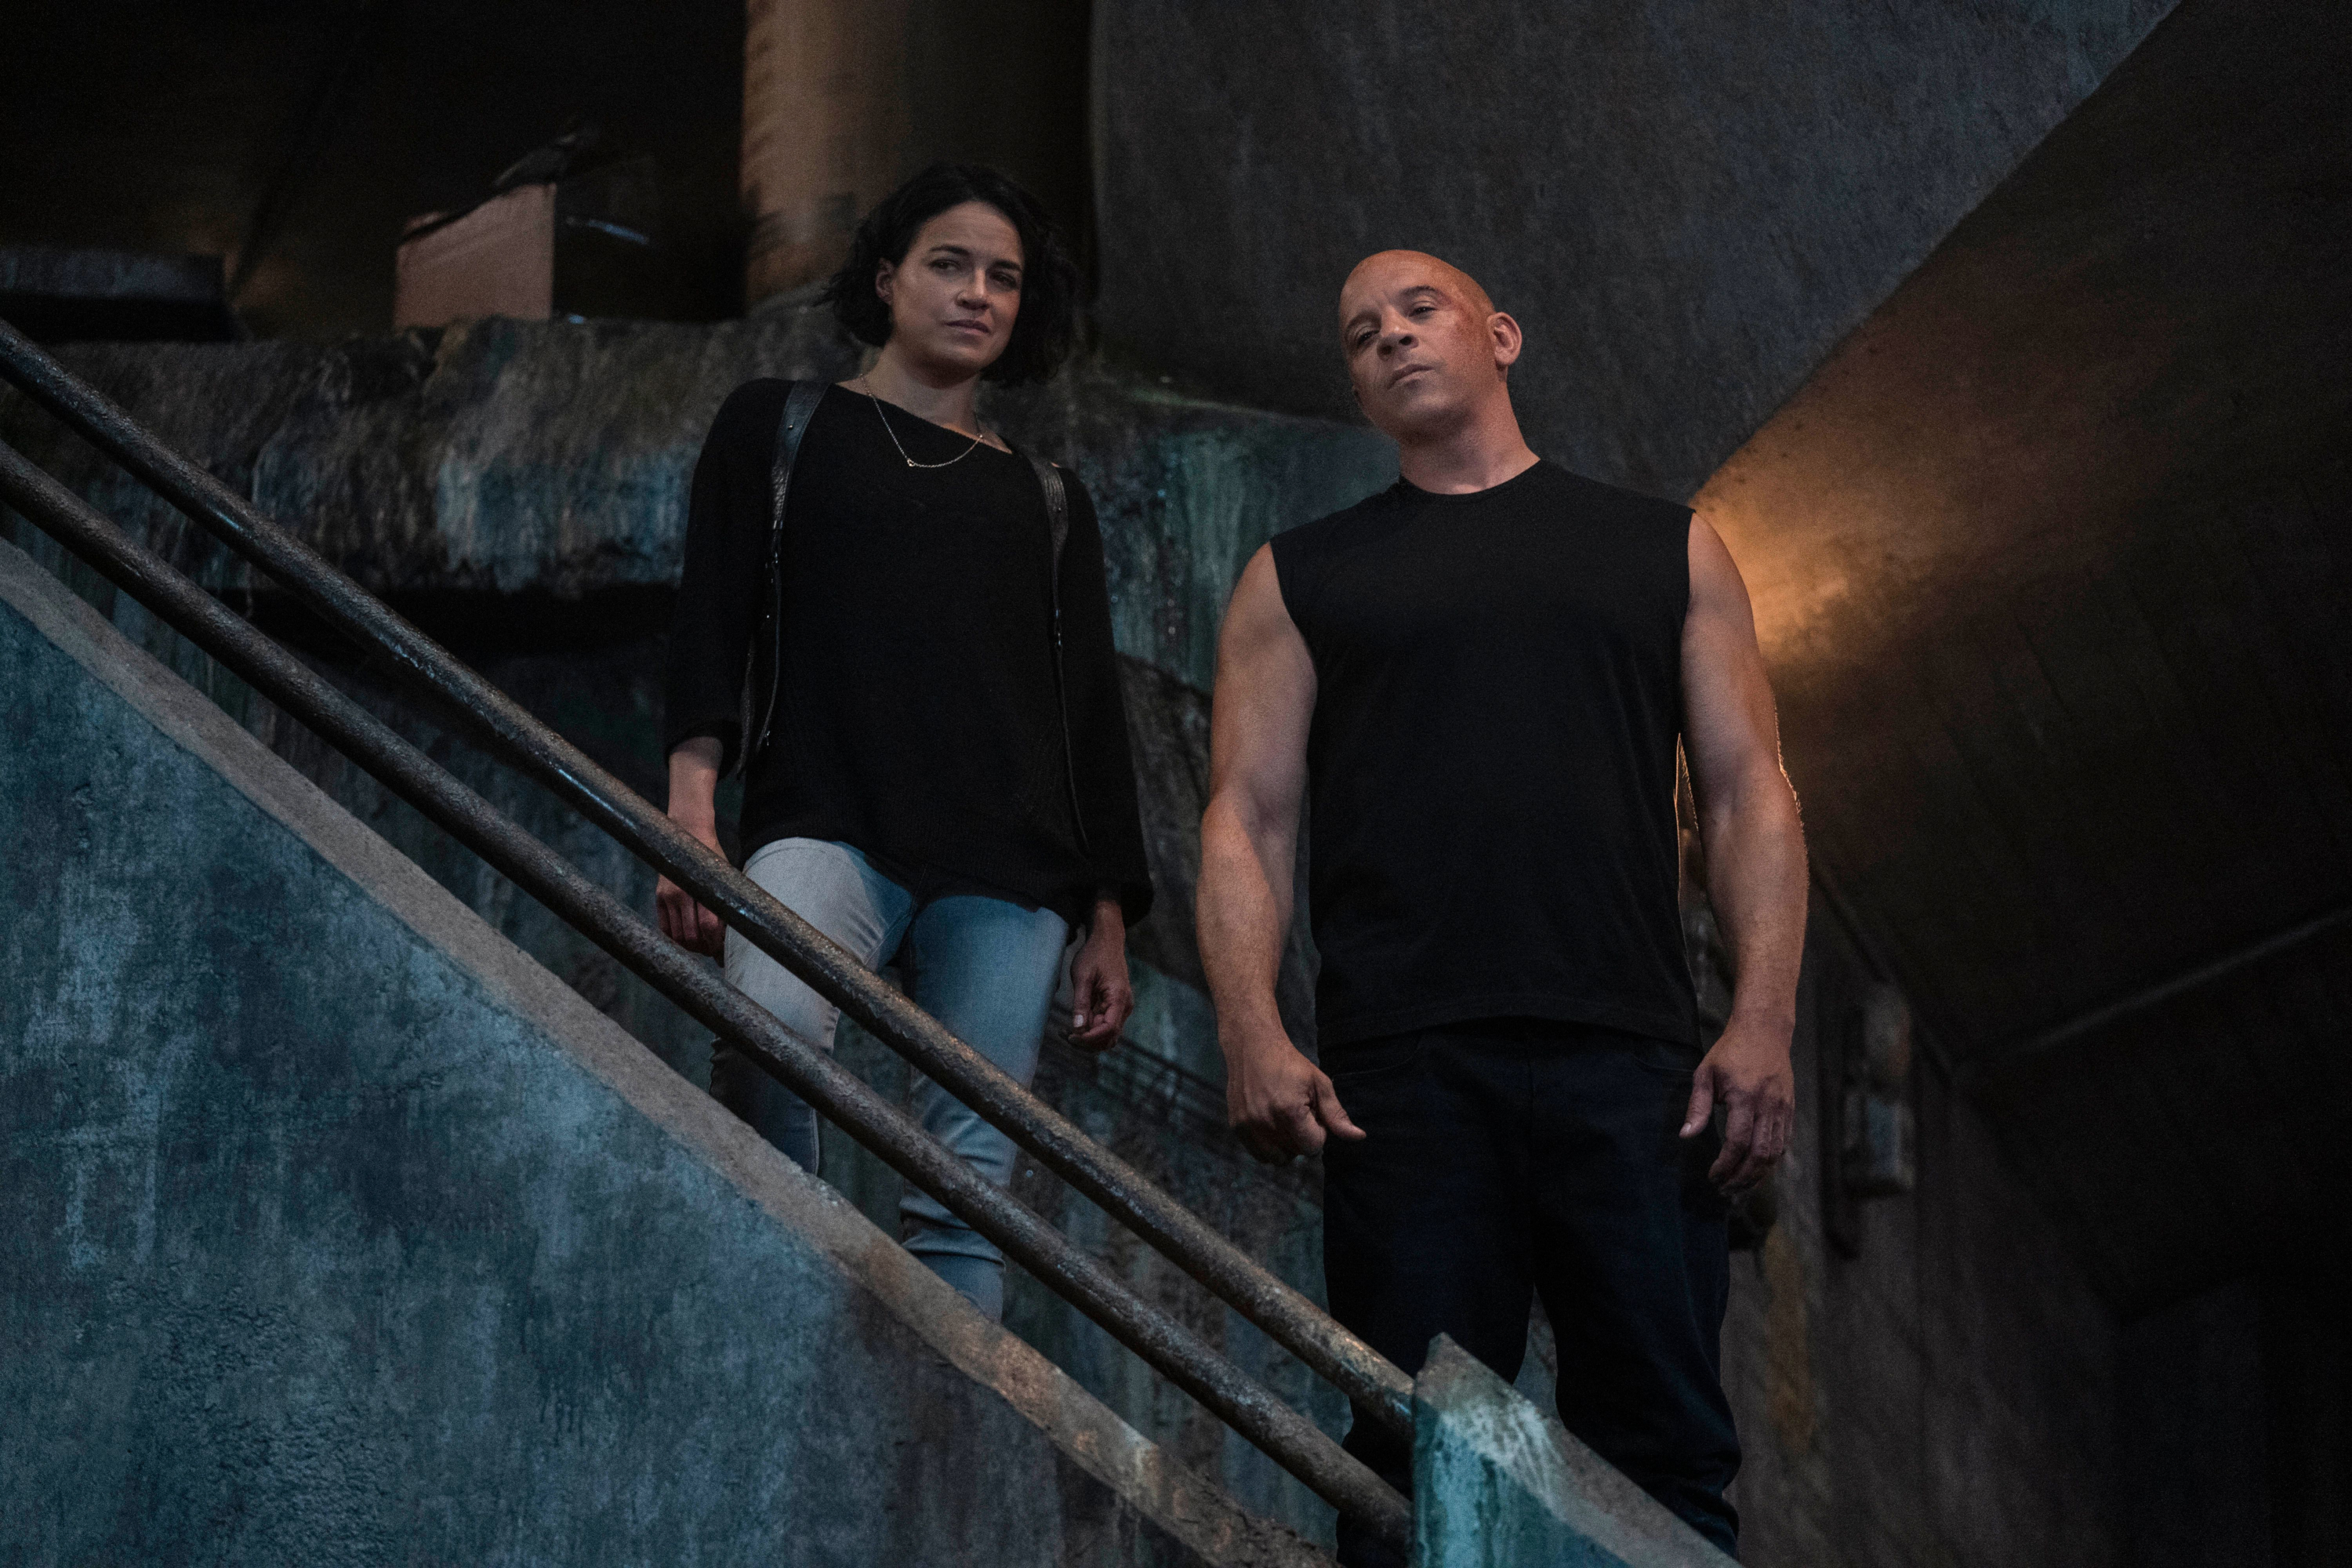 movie, fast & furious 9, dominic toretto, letty ortiz, michelle rodriguez, vin diesel, fast & furious